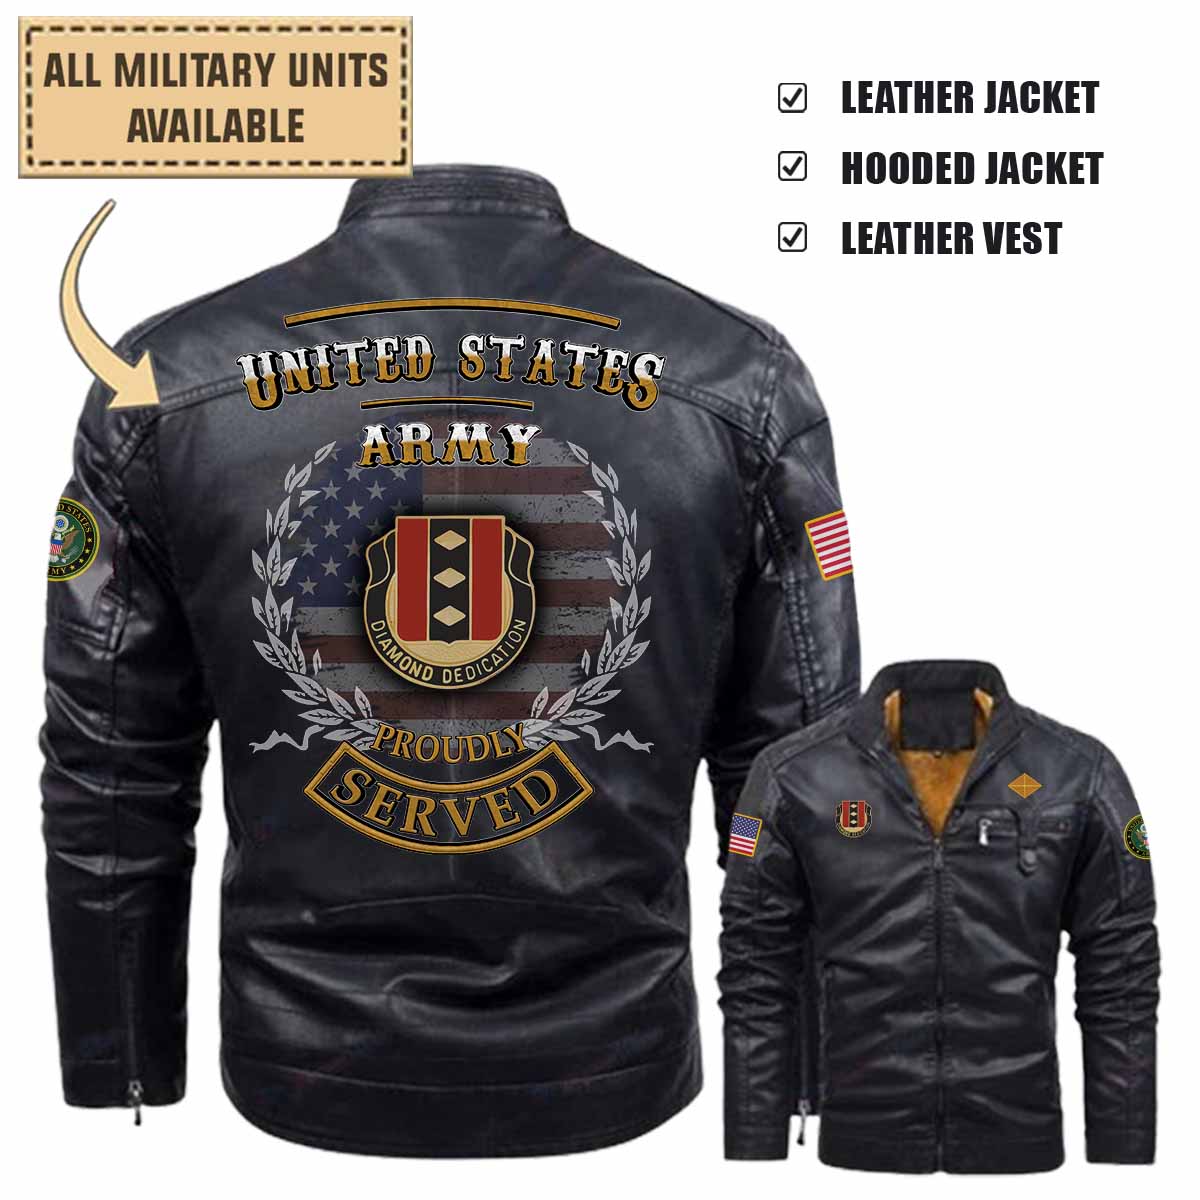 39th finance battalionleather jacket and vest g3fty